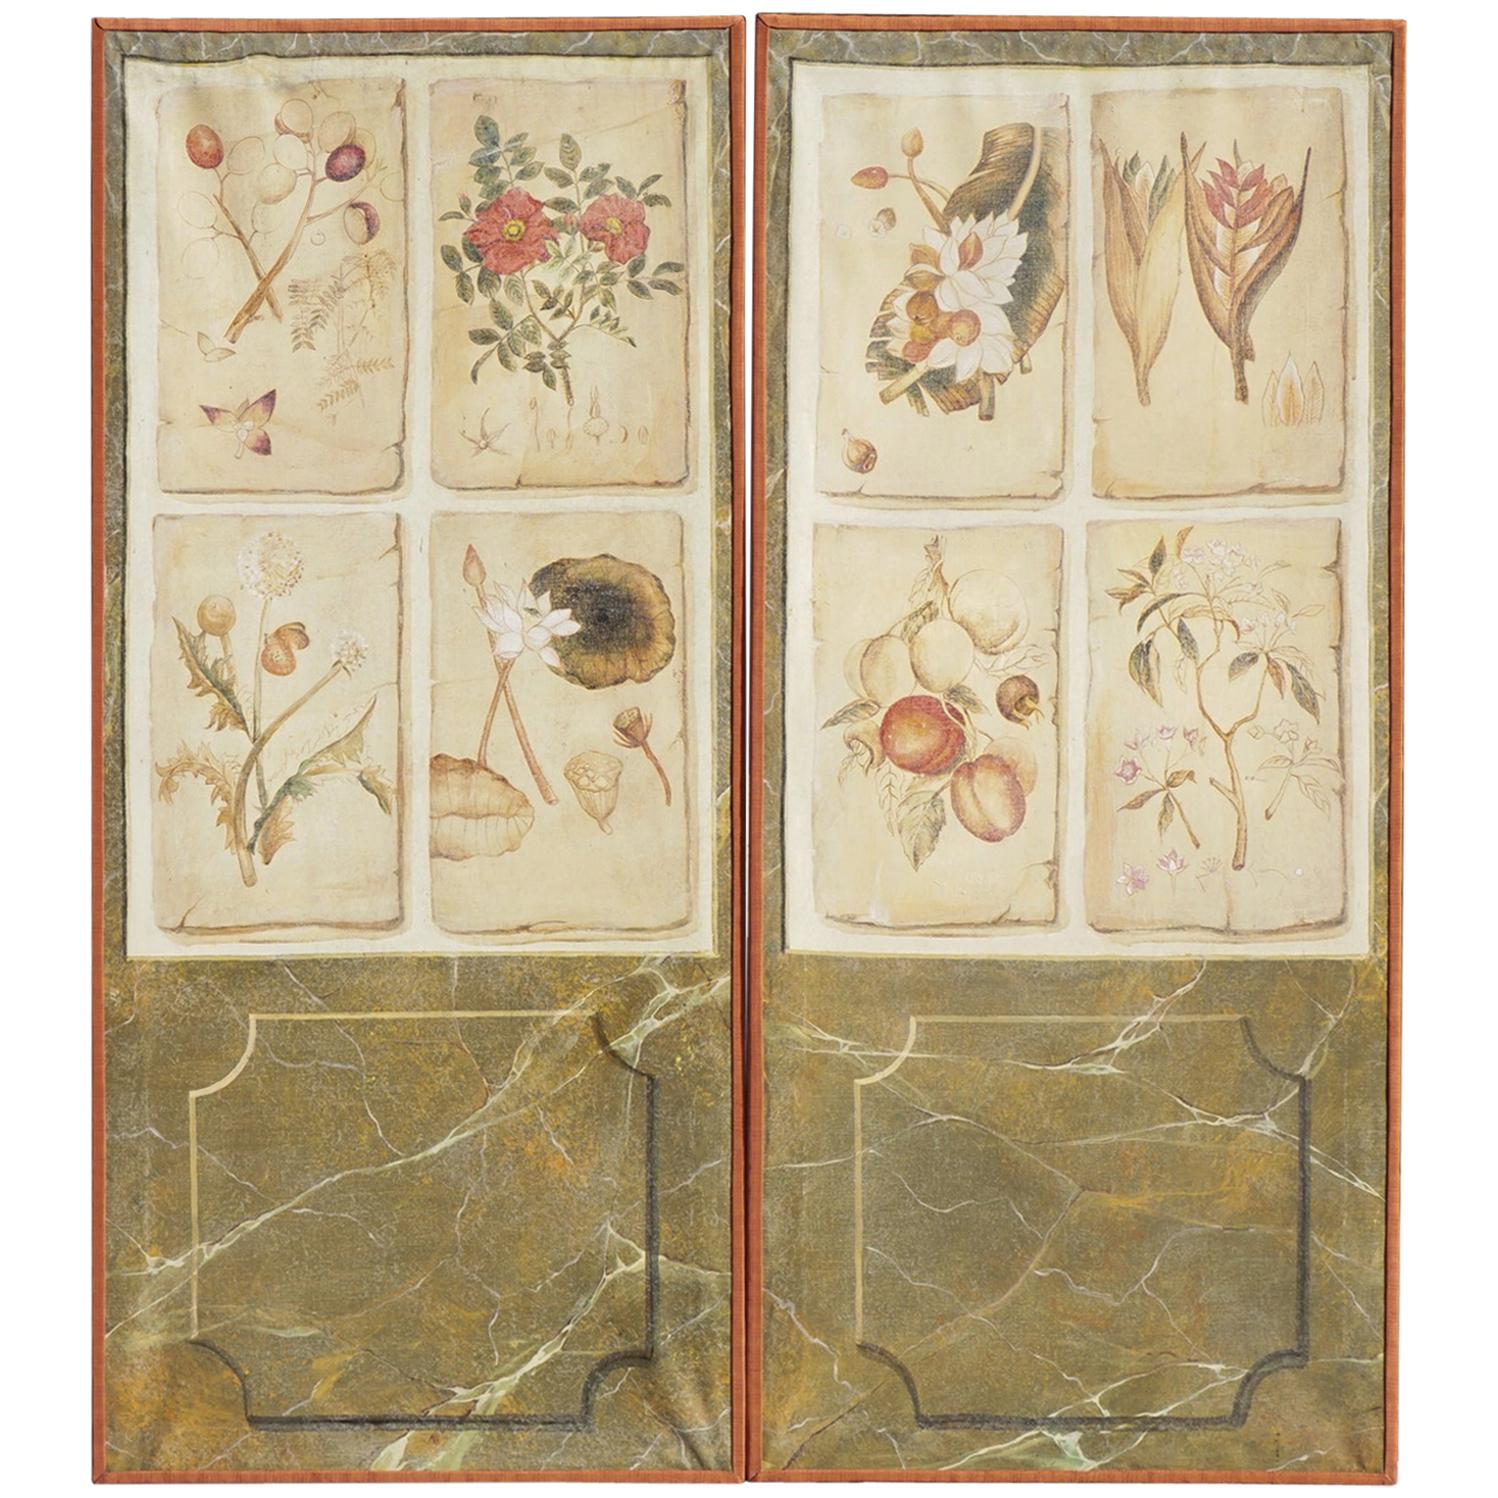 Pair of Trompe l'oeil Painted Panels from the Estate of Bunny Mellon